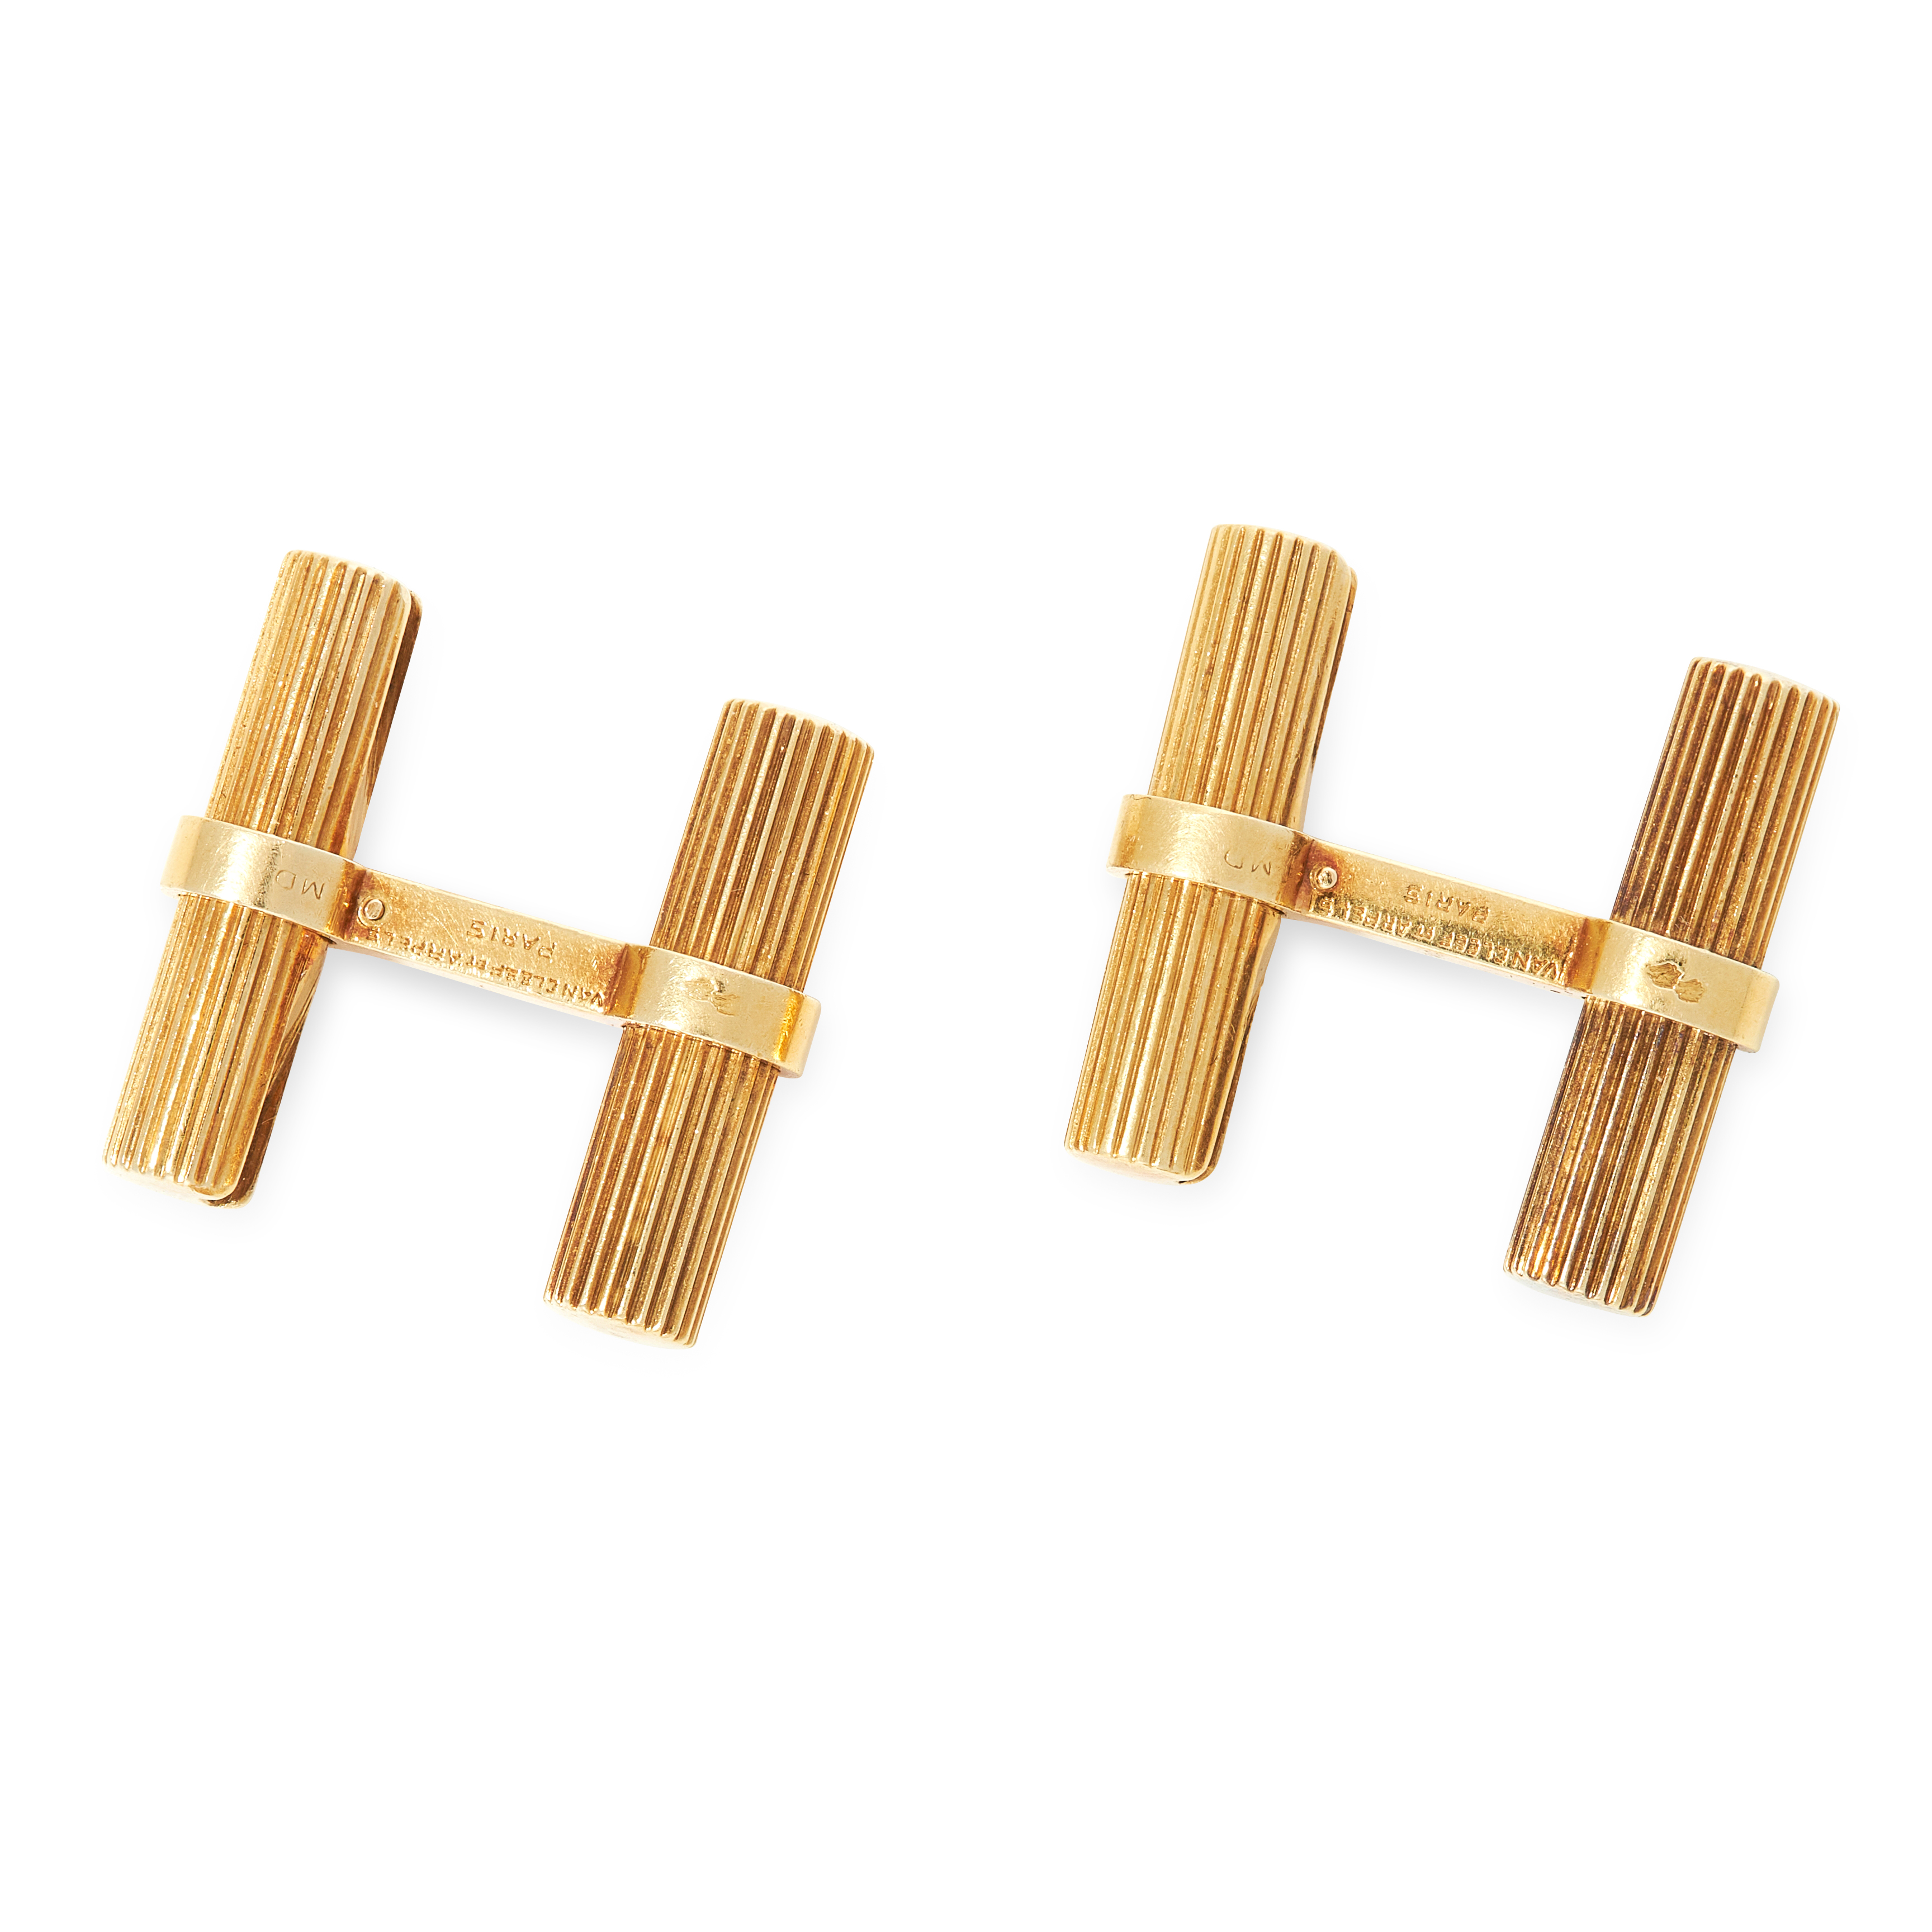 A PAIR OF VINTAGE CUFFLINKS, VAN CLEEF & ARPELS in 18ct yellow gold, each formed of two reeded